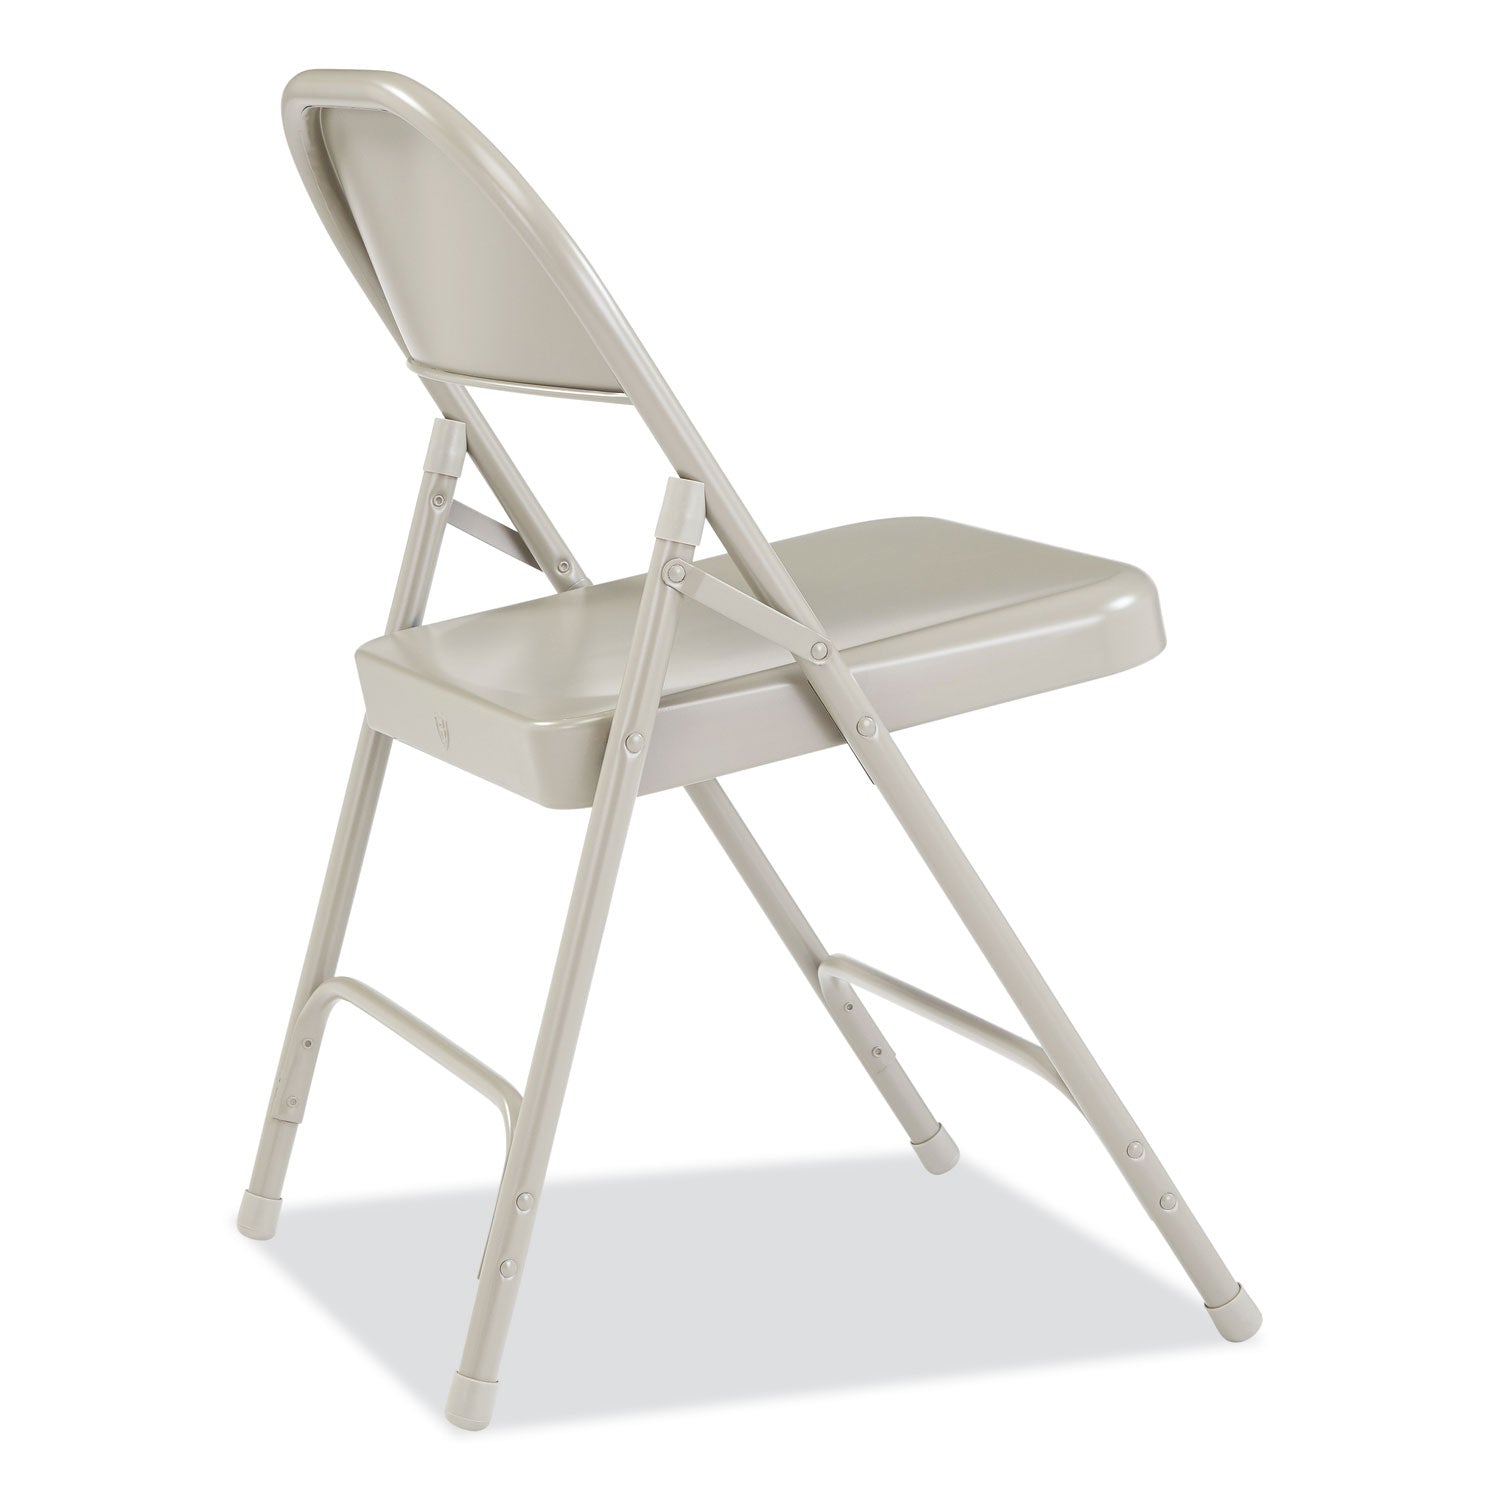 50-series-all-steel-folding-chair-supports-500-lb-1675-seat-height-gray-seat-back-base-4-carton-ships-in-1-3-bus-days_nps52 - 4